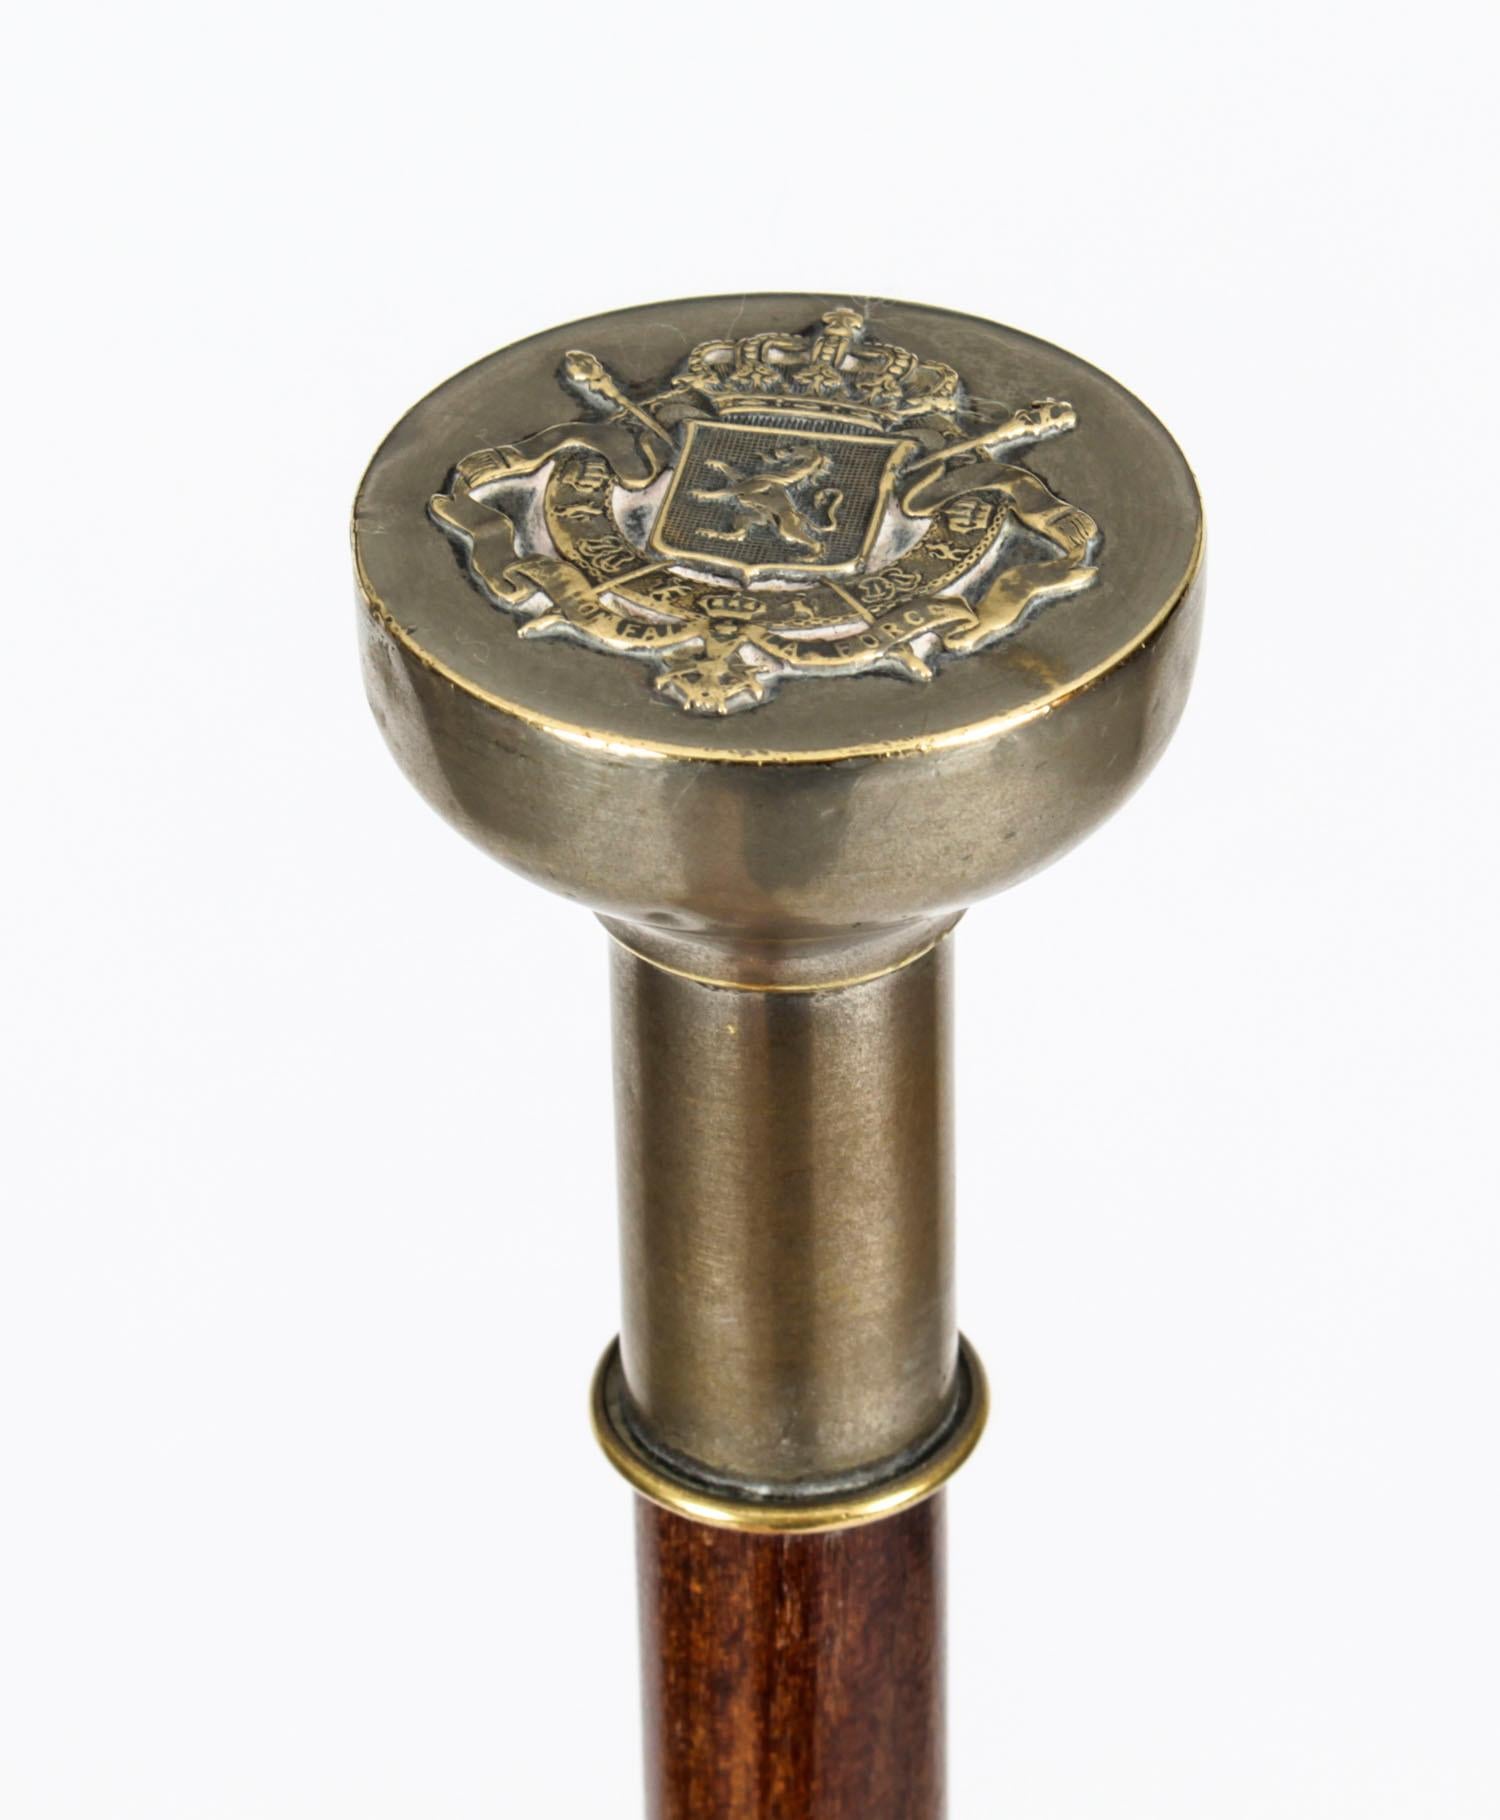 This is a superb Edwardian silver plated Malacca walking stick, circa 1910 in date.
 
This decorative walking cane features a splendid globular silvered pommel with a large military coat of arms on a tapering shaft and comes complete with its